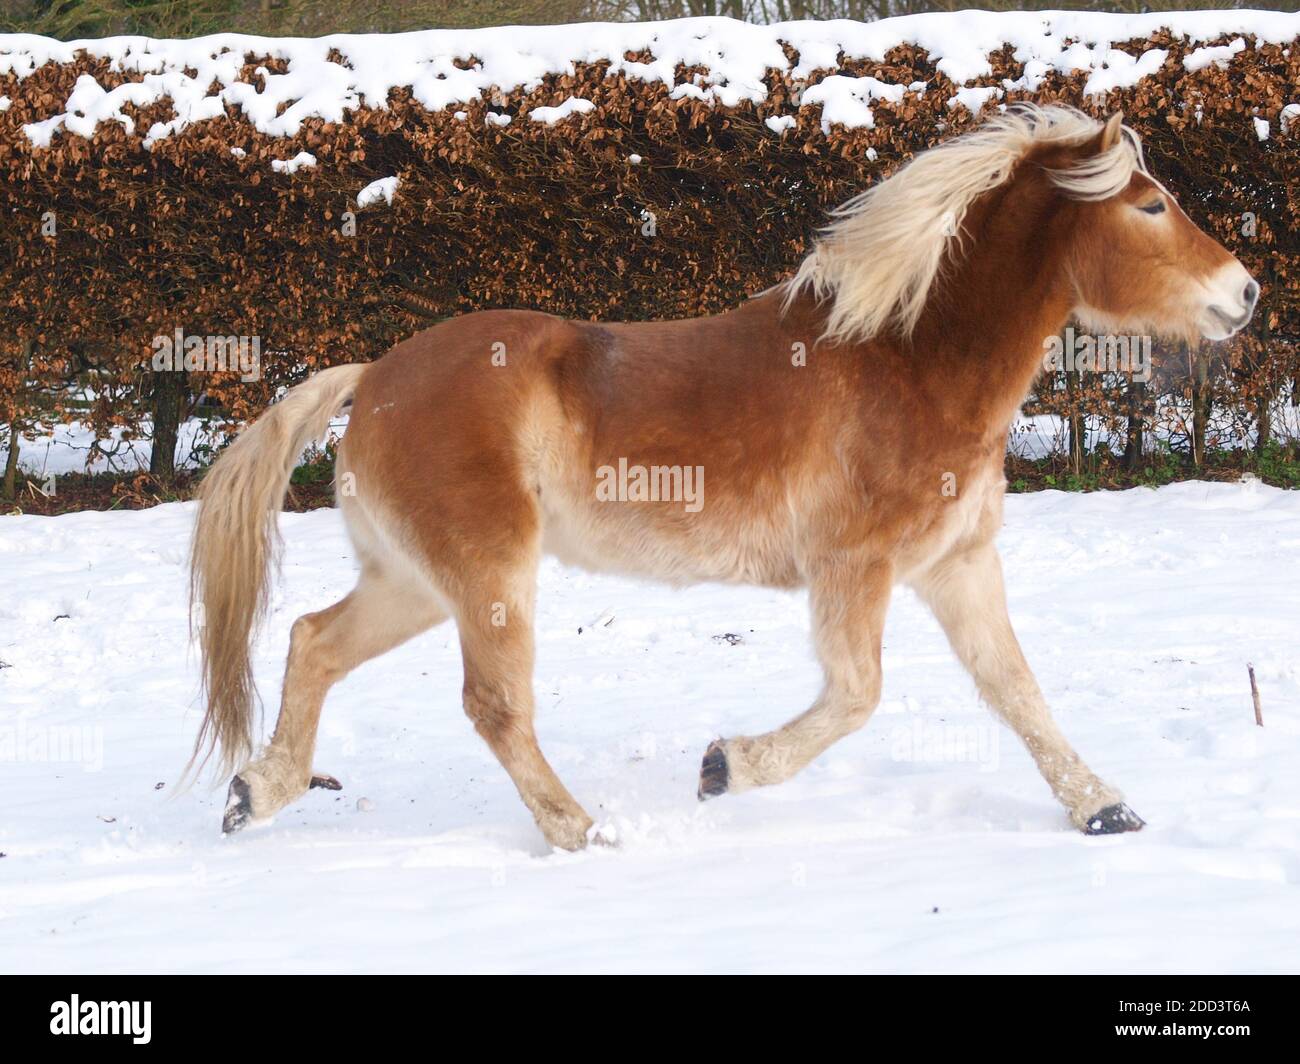 A Haflinger horse enjoys being at liberty in a snowy paddock. Stock Photo